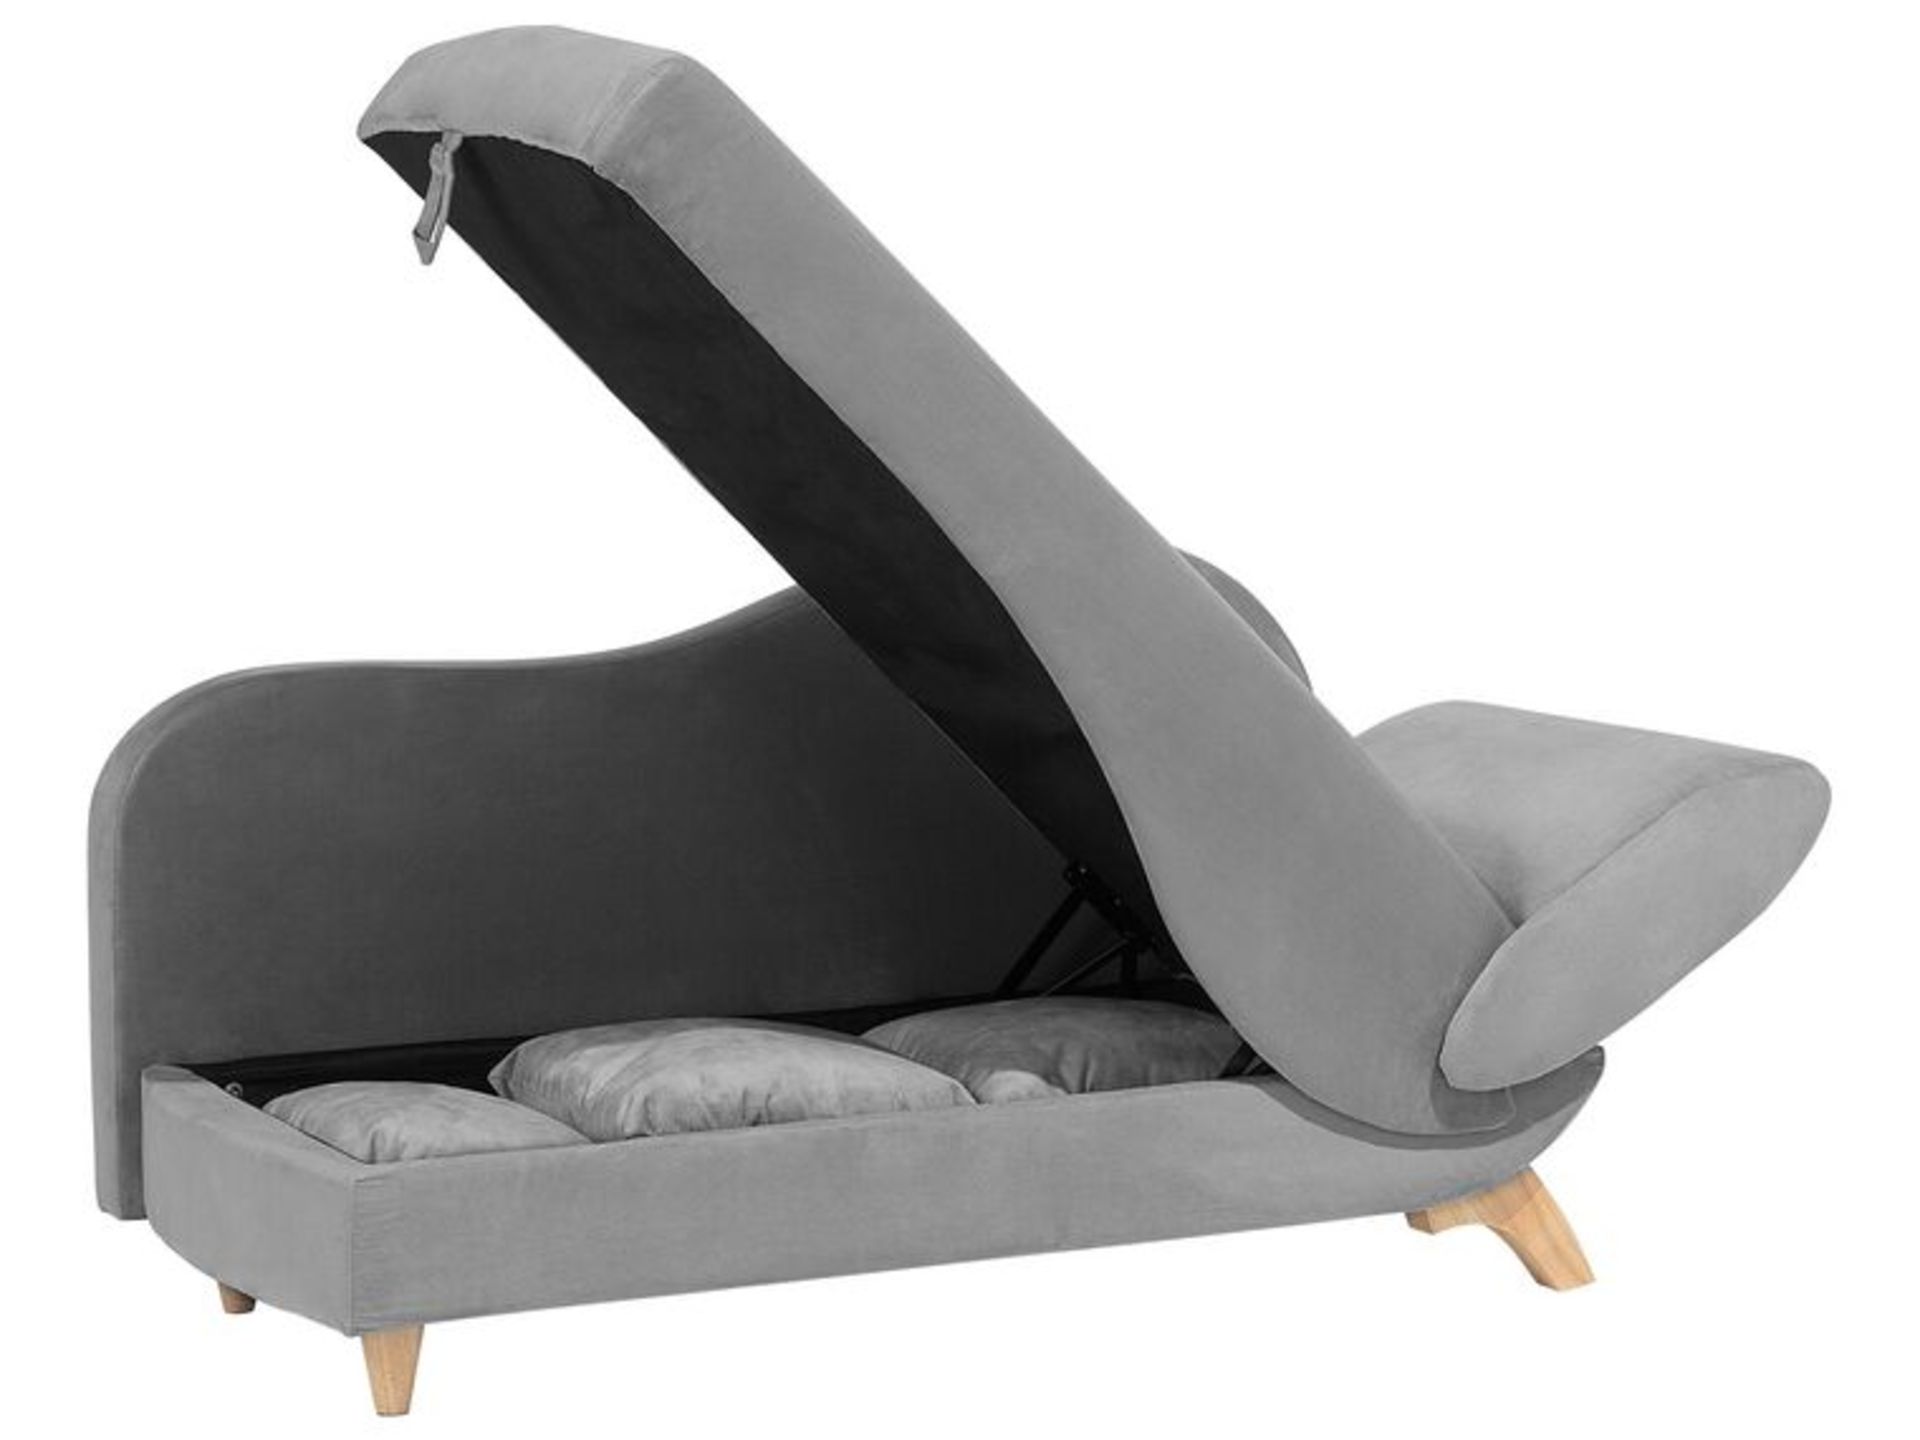 Meri Right Hand Velvet Chaise Lounge with Storage Light Grey. - SR6. RRP £499.99. This classic two- - Image 2 of 2